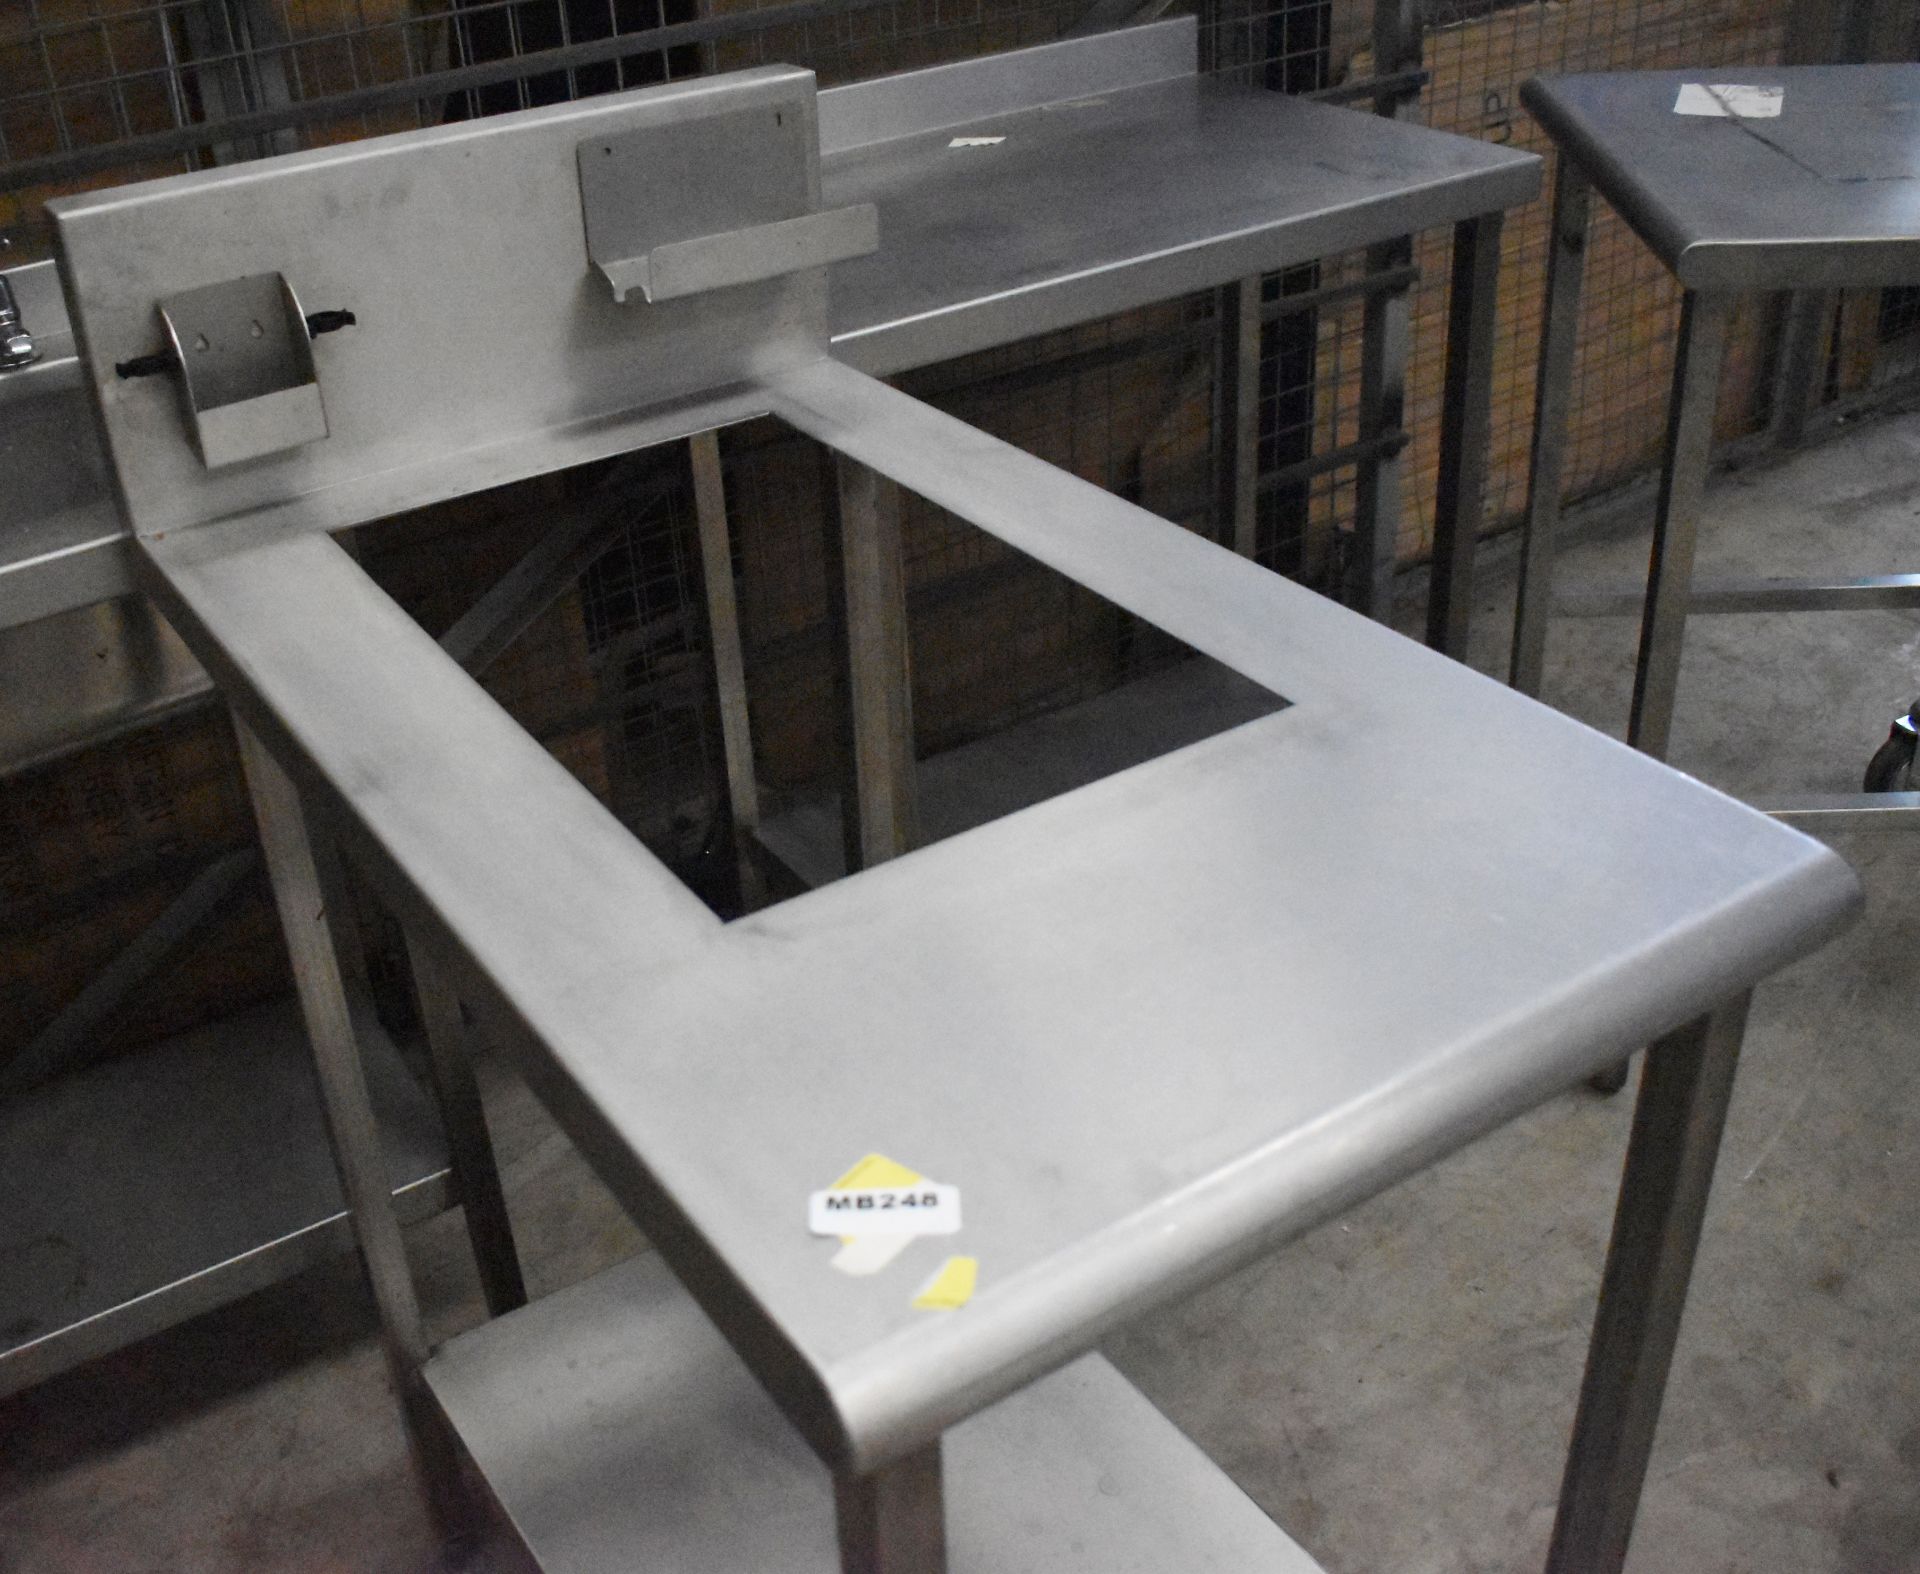 1 x Stainless Steel Table With Gastro Pan Insert and Undershelf - H90 x W46 x D88 cms - CL453 -